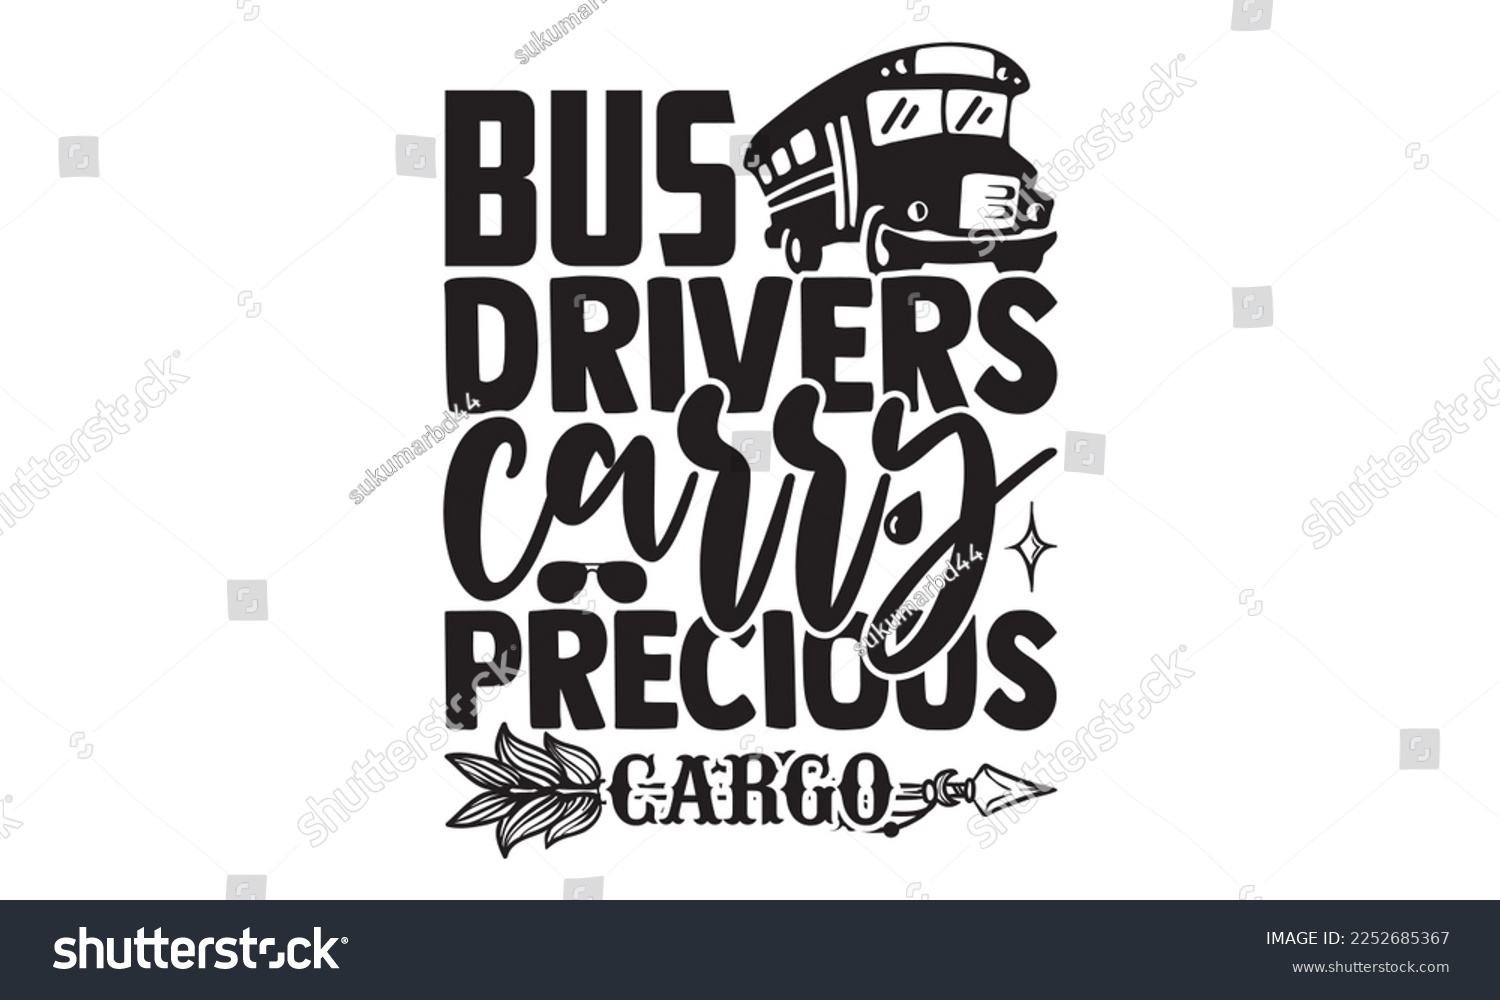 SVG of Bus Drivers Carry Precious Cargo - Bus Driver T-shirt Design, Handmade calligraphy vector, Hand drawn vintage illustration with hand-lettering and decoration elements, svg for Cutting Machine, Silhoue svg